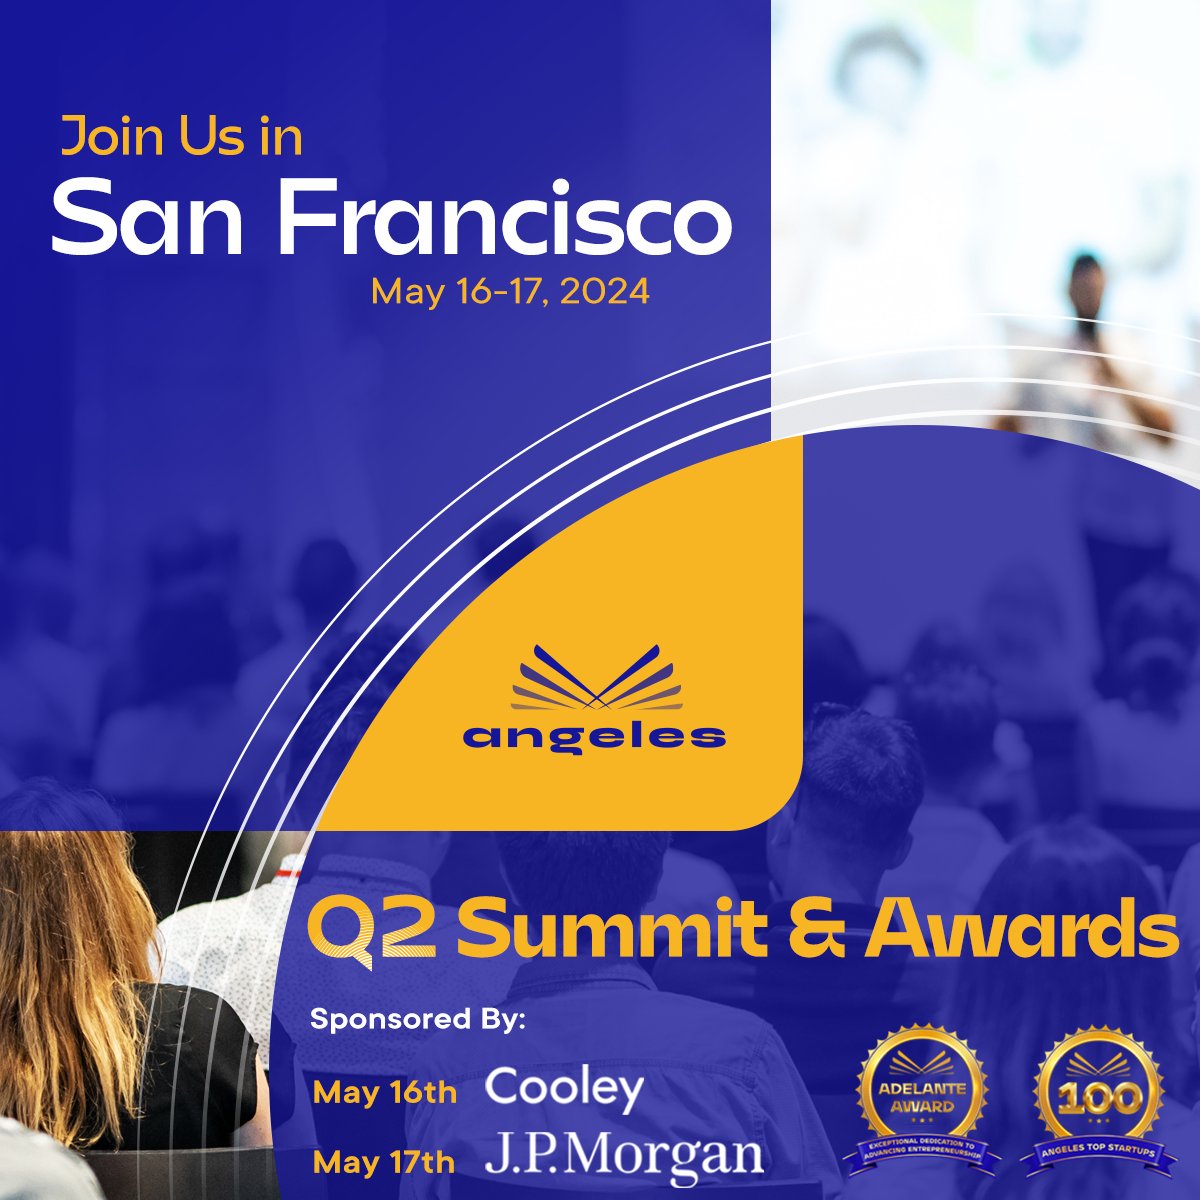 The top 3 reasons to attend our Q2 #Summit and Awards Event: 1. Opportunities to invest in top Latino startups 2. Keep up with the latest trends & opportunities to grow your portfolio. 3. Join a world-class network of investors. Regsiter here: eventbrite.com/e/2024-2nd-qua…